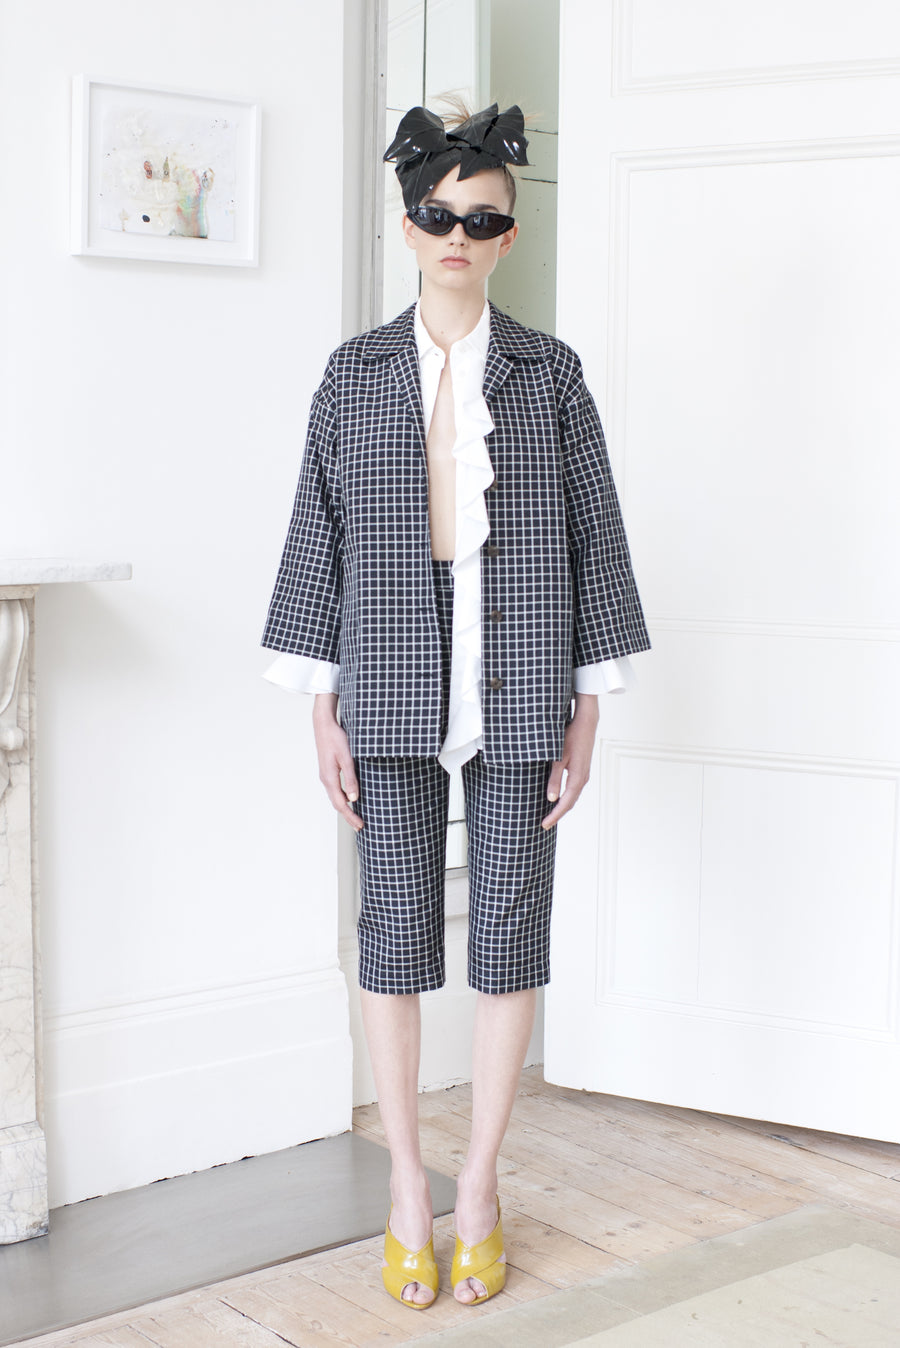 SS2016 / Look 7